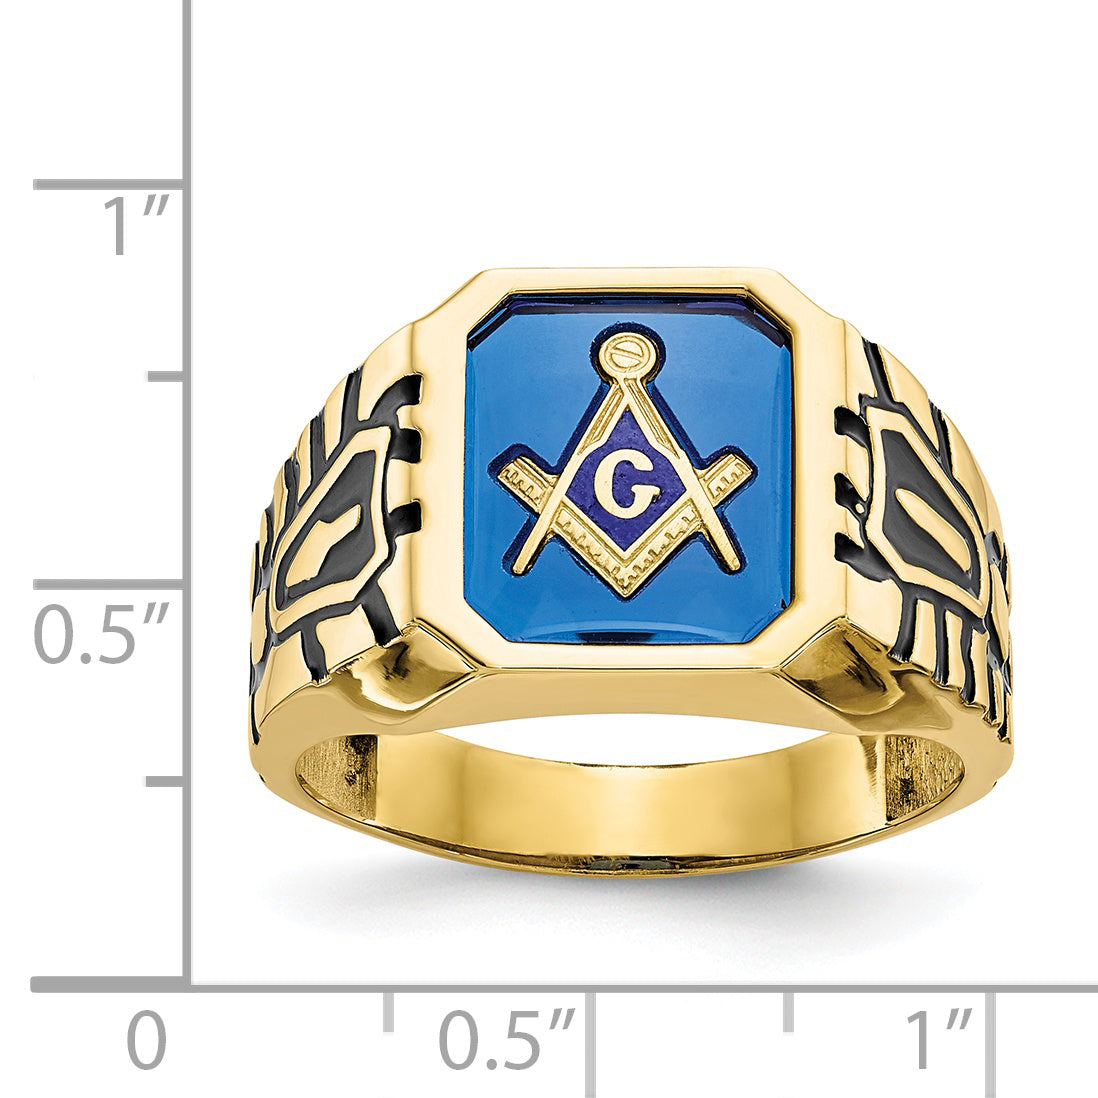 10k Men's Polished, Antiqued and Grooved with Imitation Blue Spinel Masonic Ring